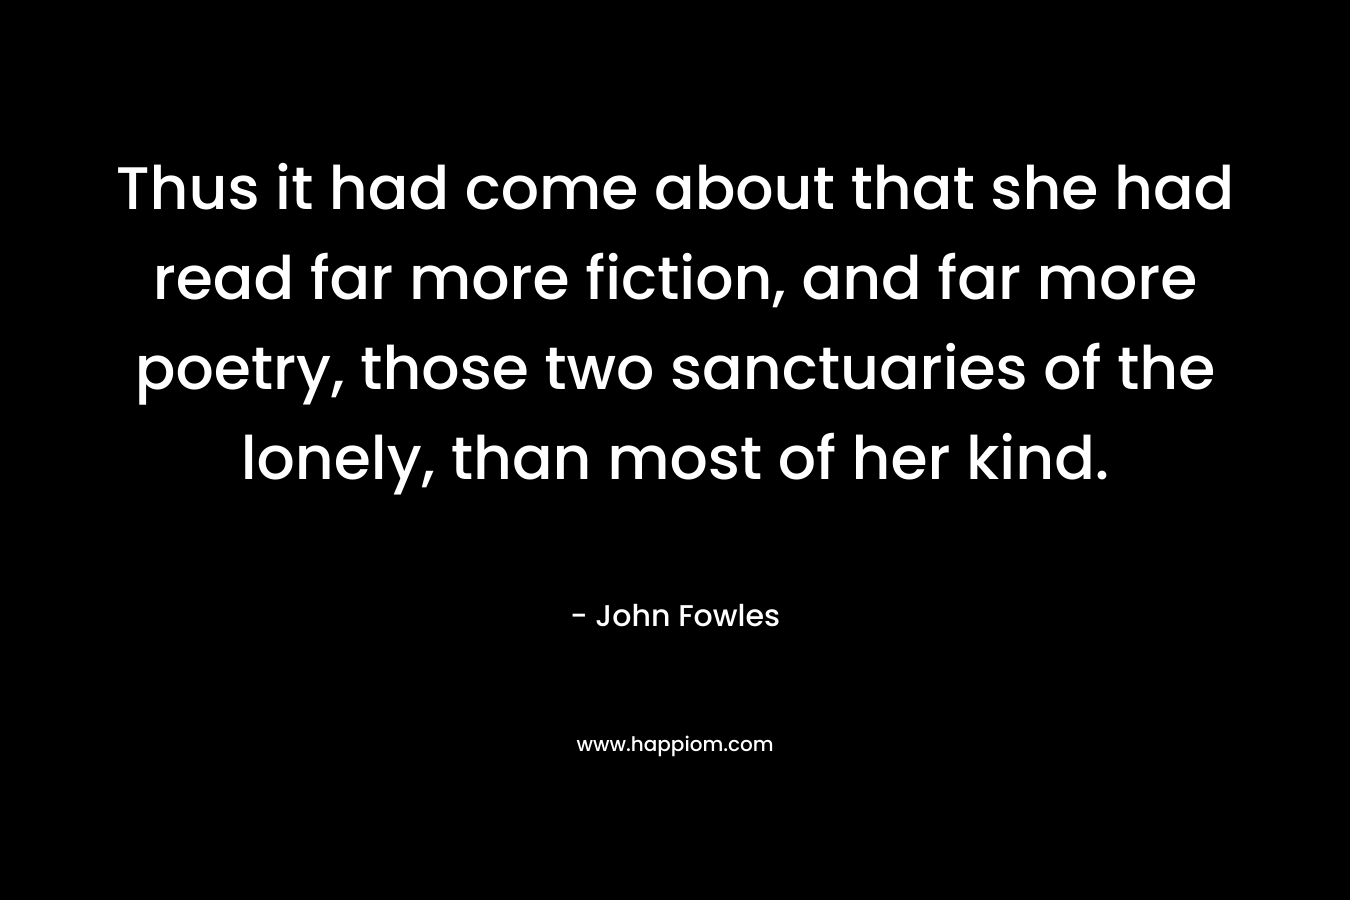 Thus it had come about that she had read far more fiction, and far more poetry, those two sanctuaries of the lonely, than most of her kind.